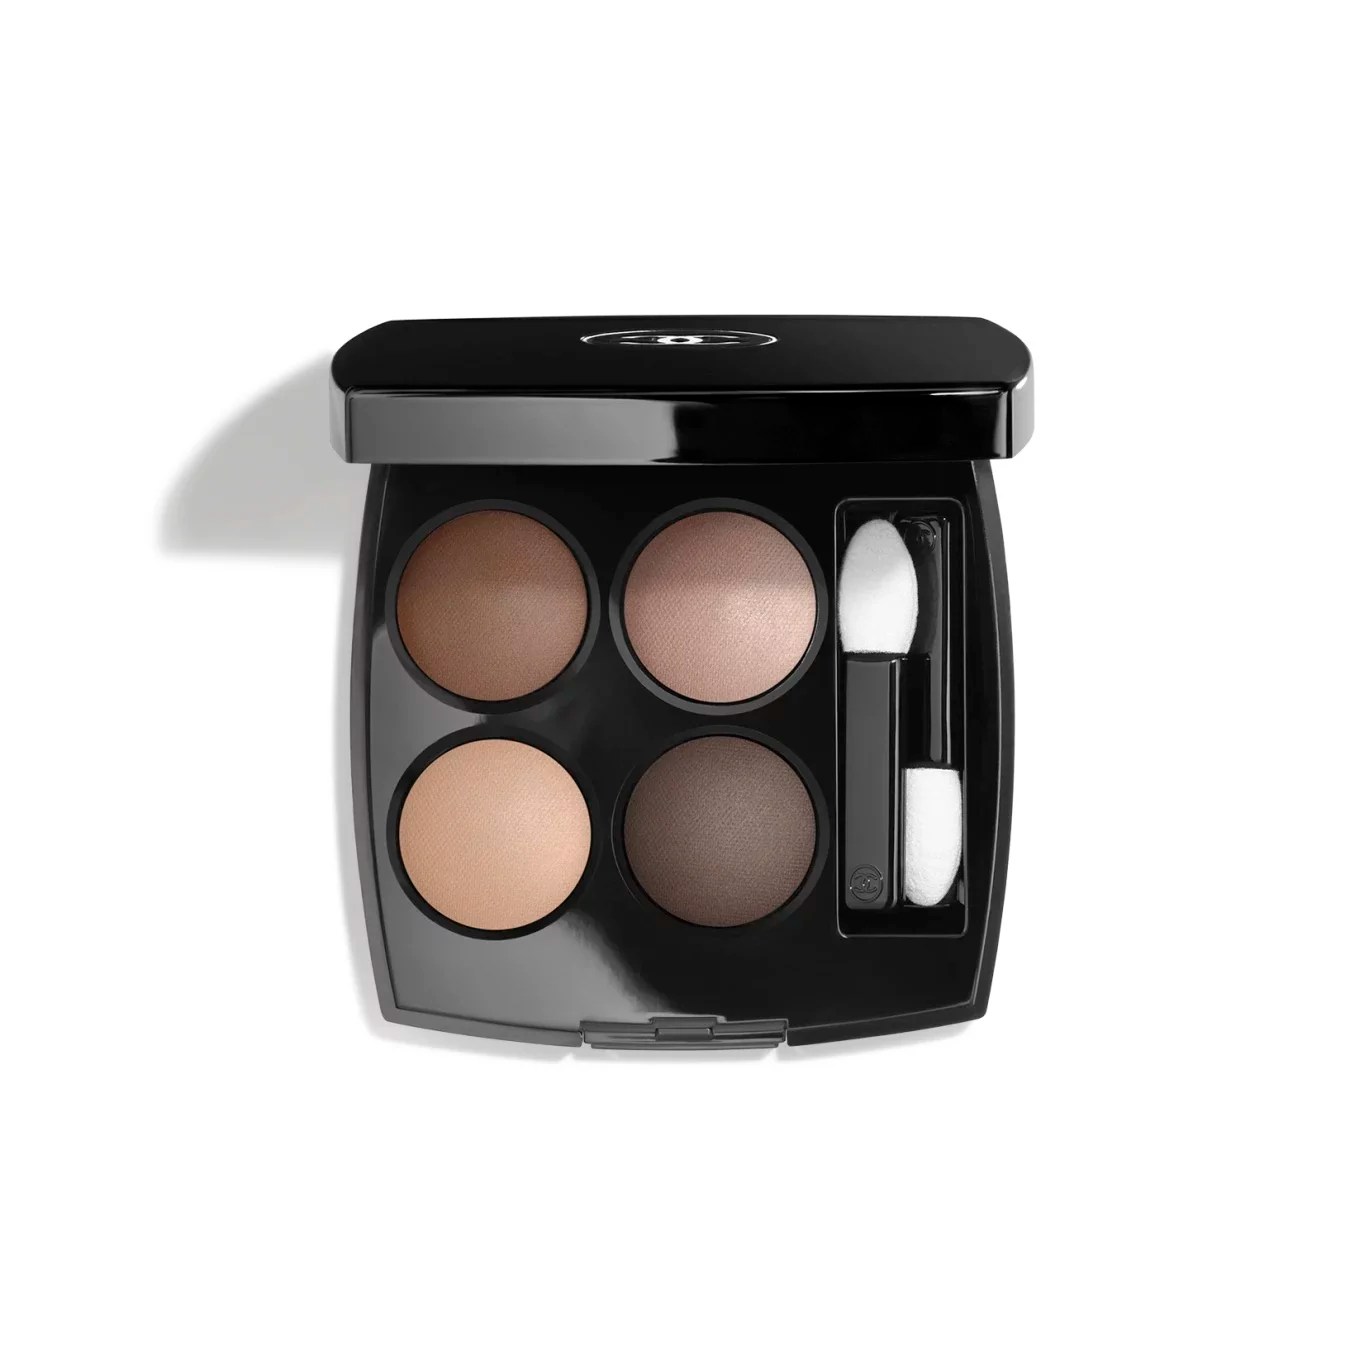 Chanel Clair-Obscur Les Ombres 4 Multi-Effect Quadra Eyeshadow